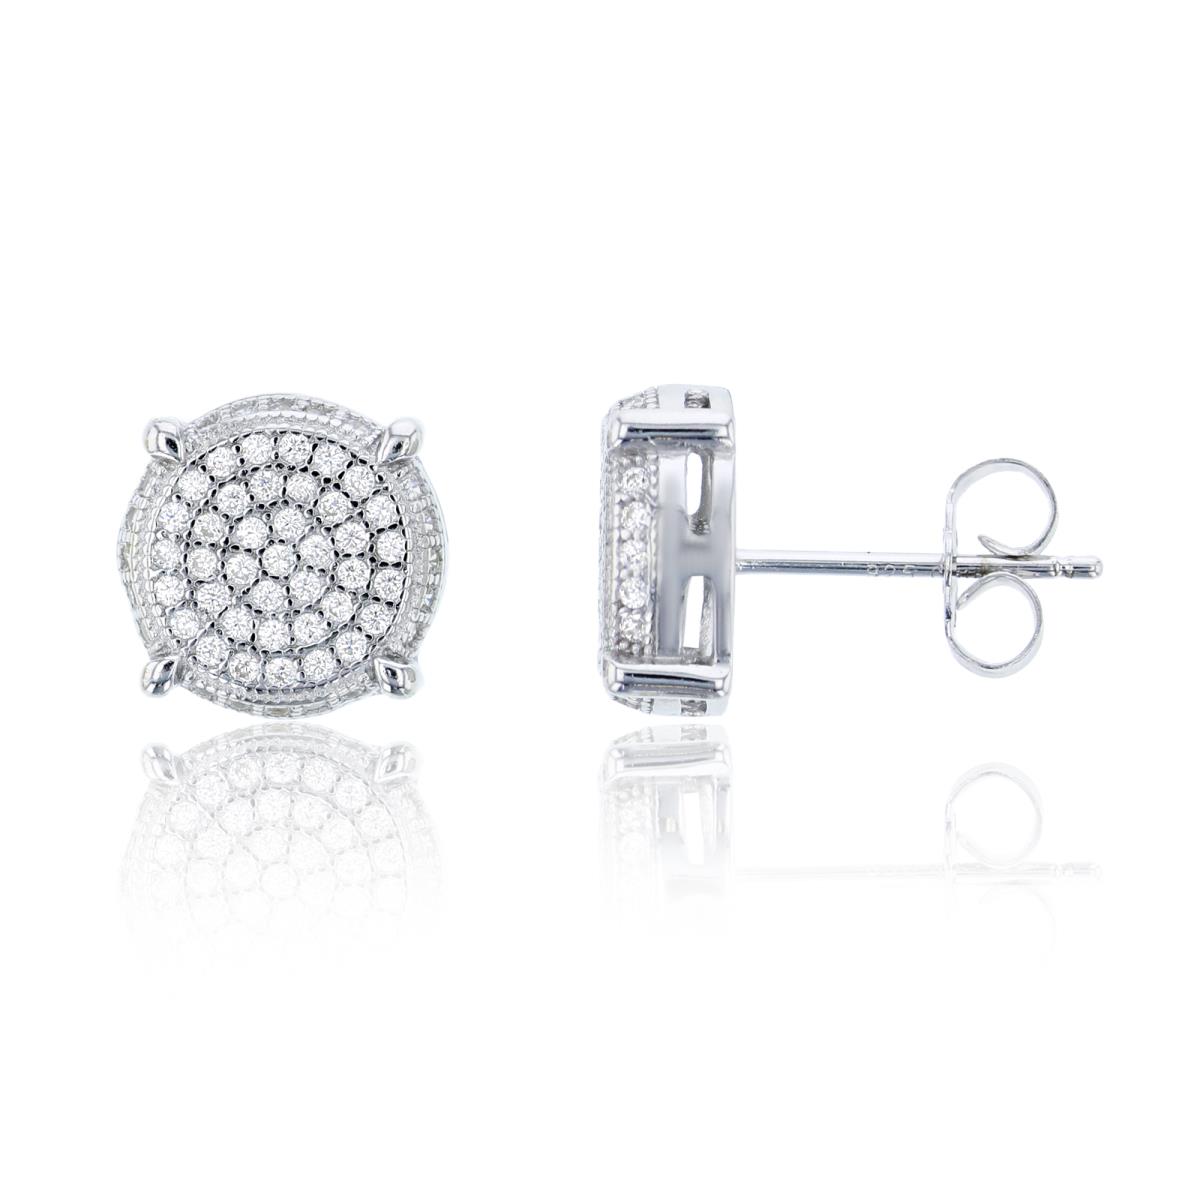 Sterling Silver 11x11mm Micropave Round Stud Earring